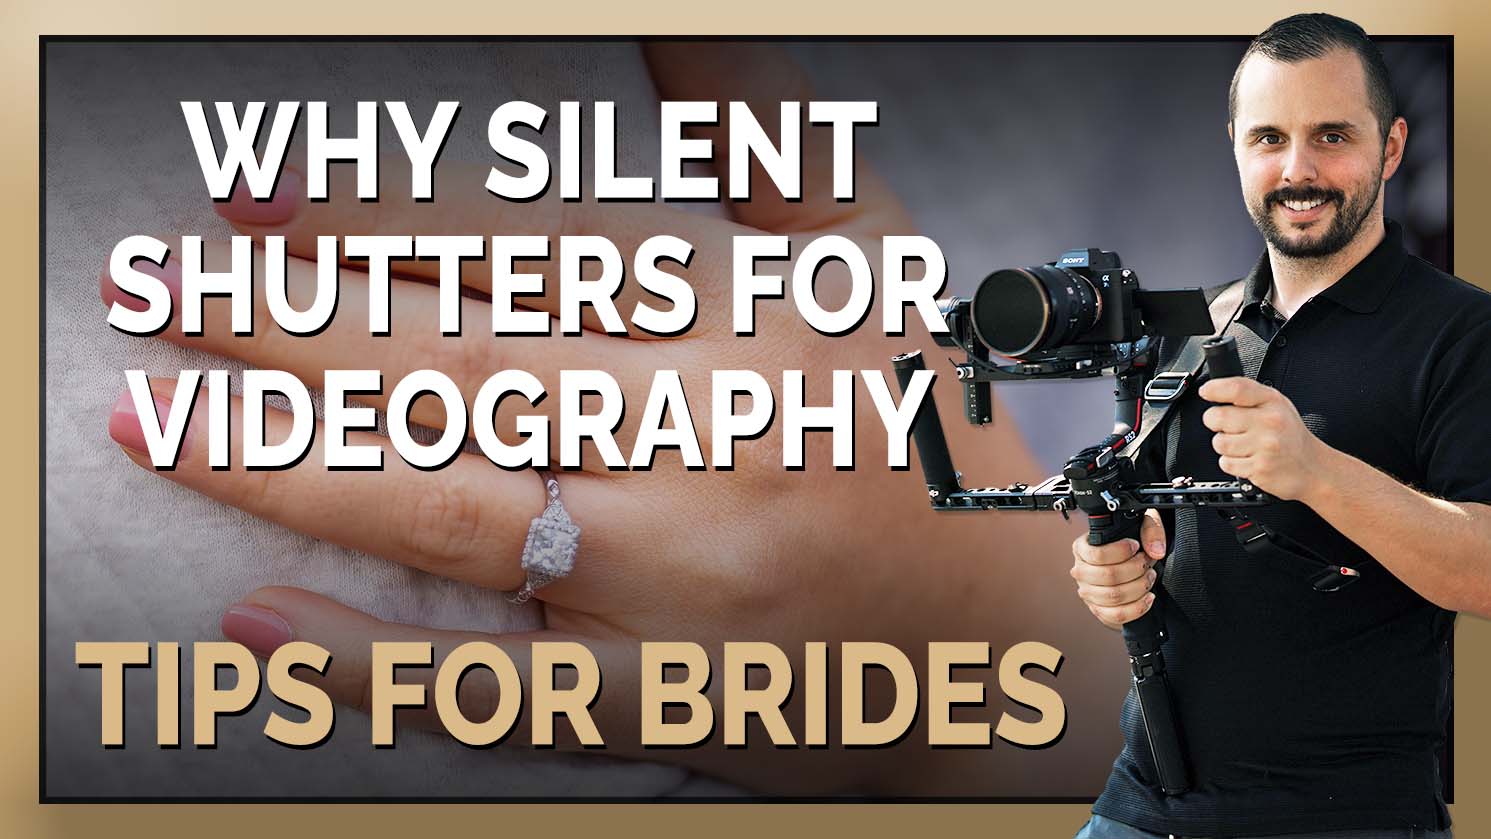 Use A Silent Shutter During Wedding Letter Readings